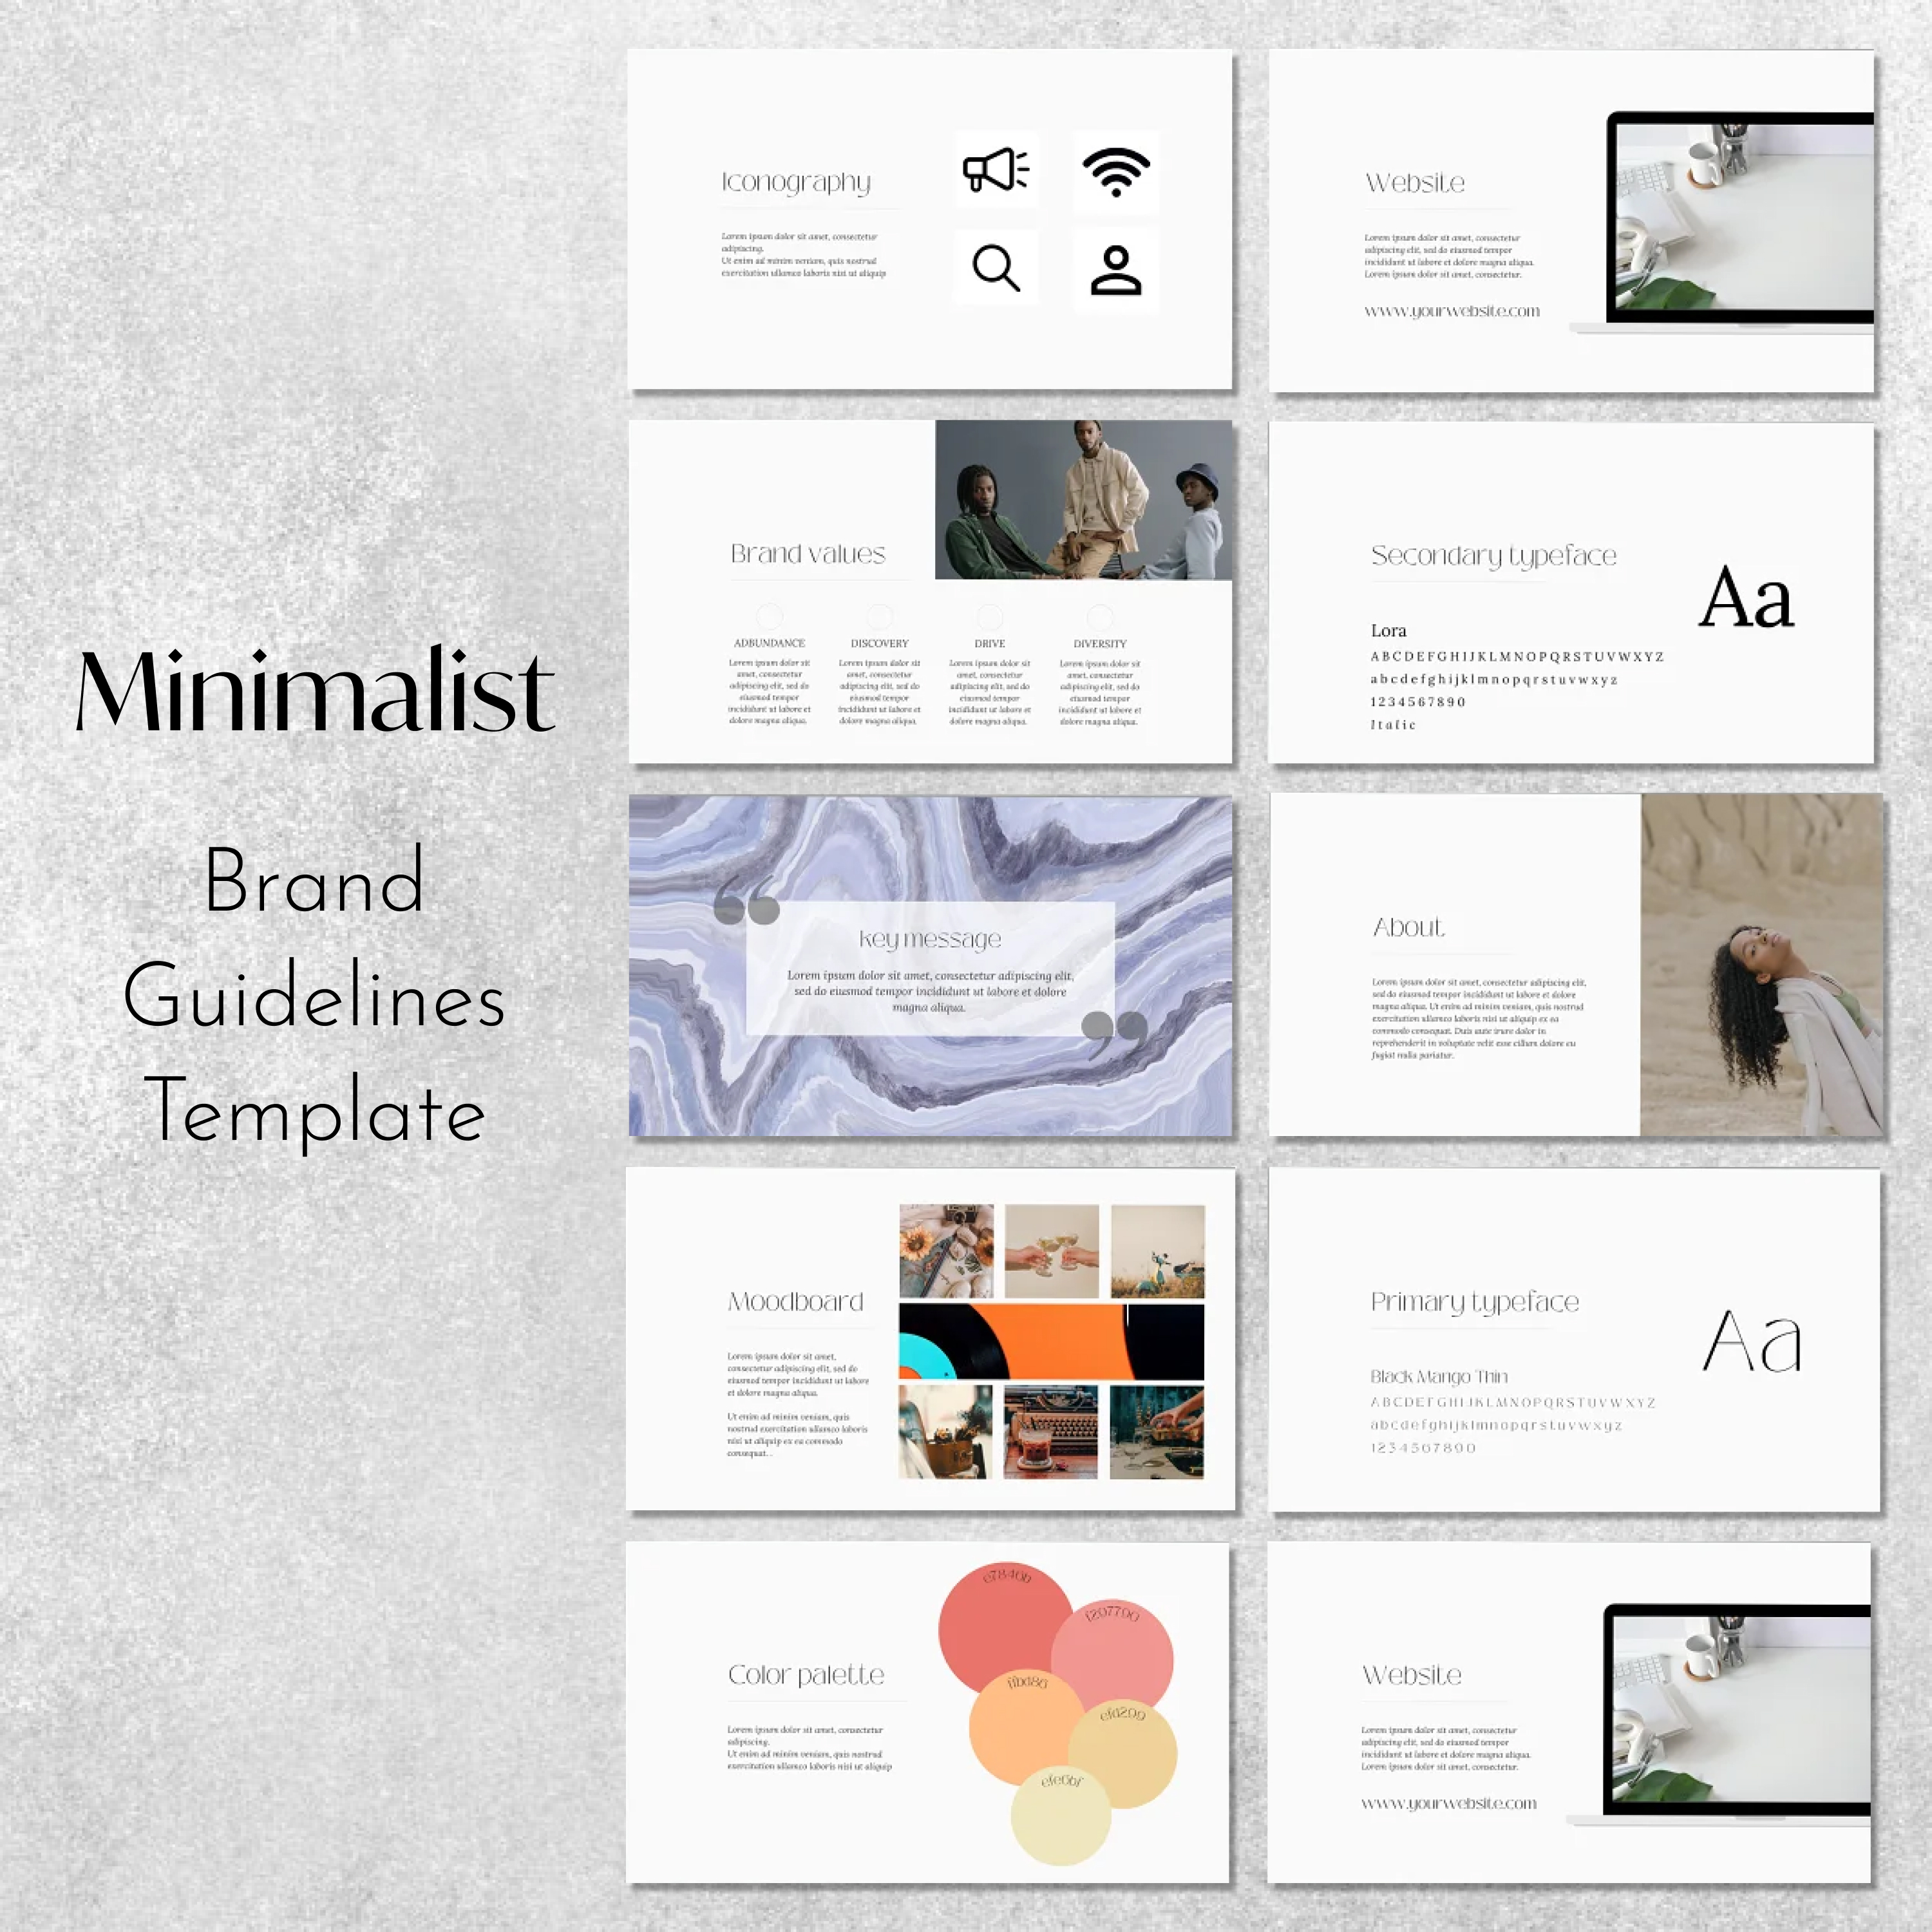 Prints of minimalist brand guidelines template.